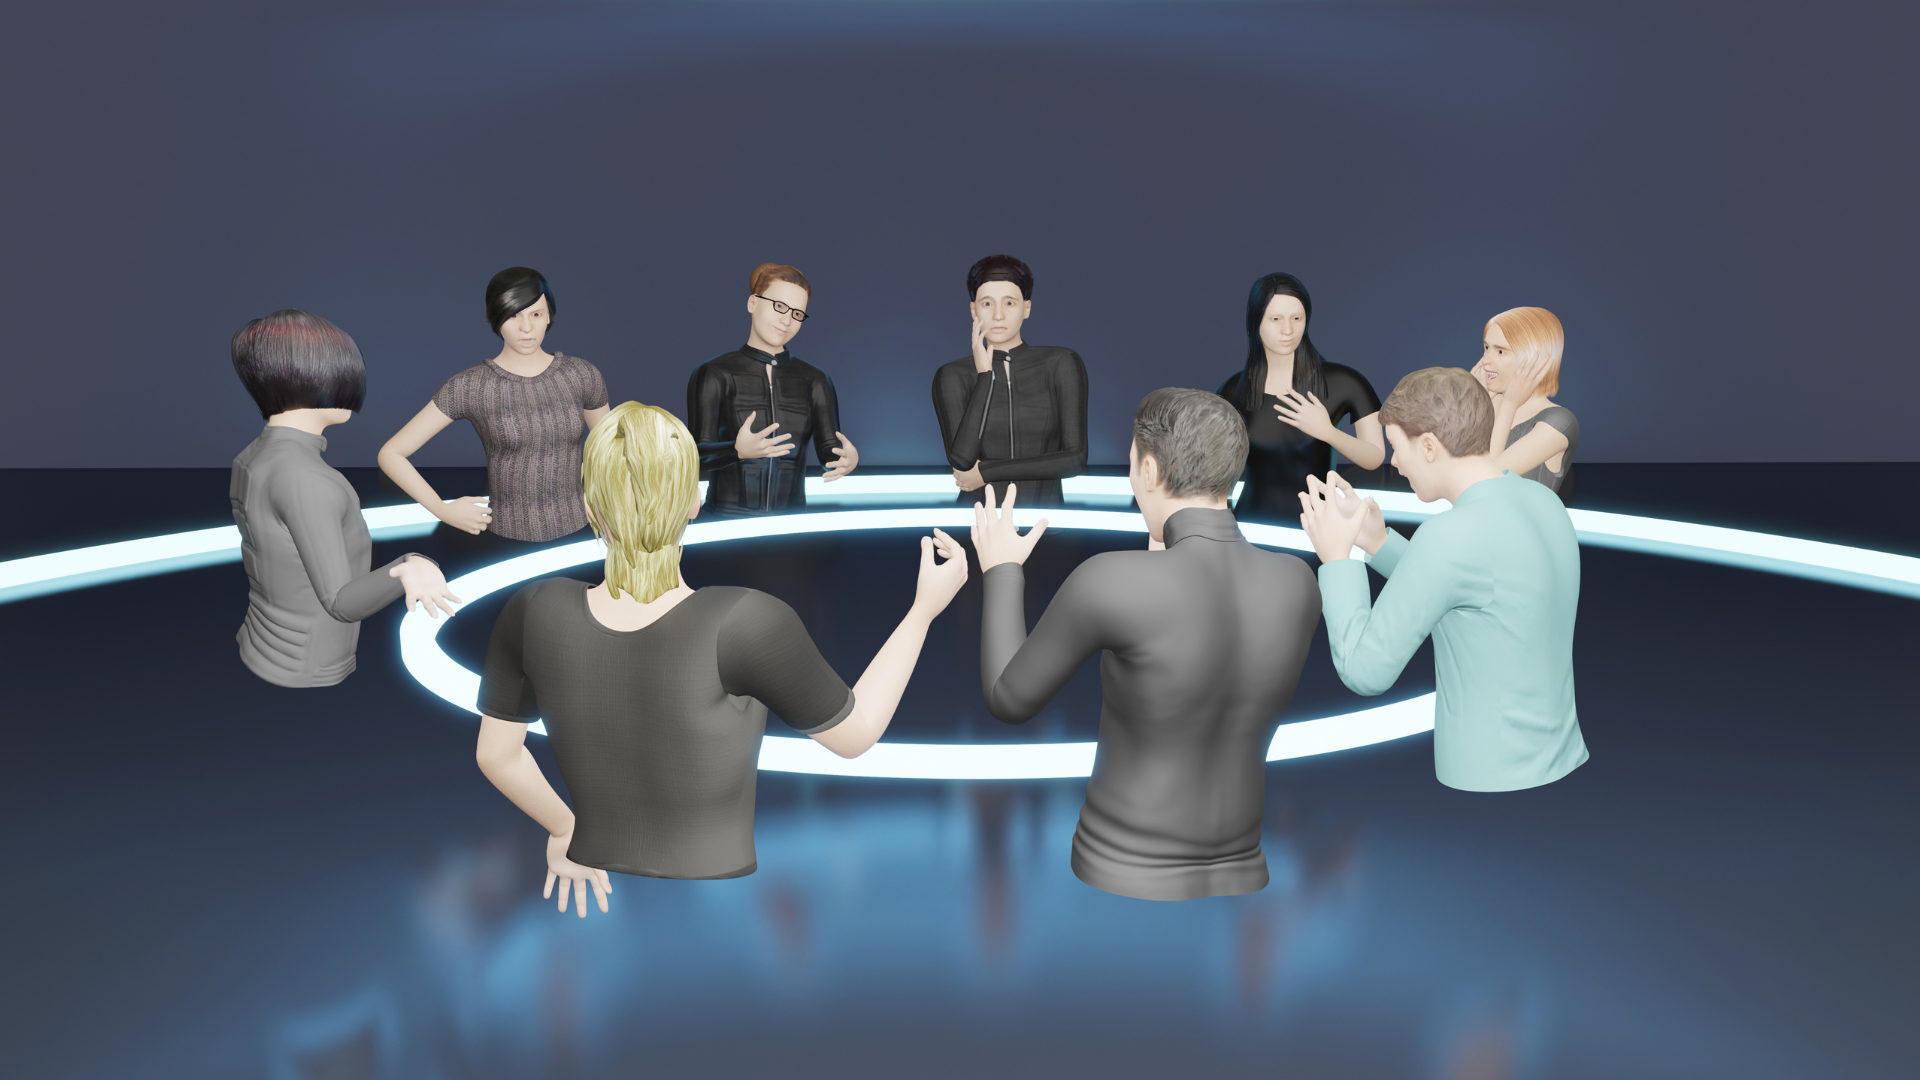 The Social Impact of Virtual Reality: Can It Bring People Together?